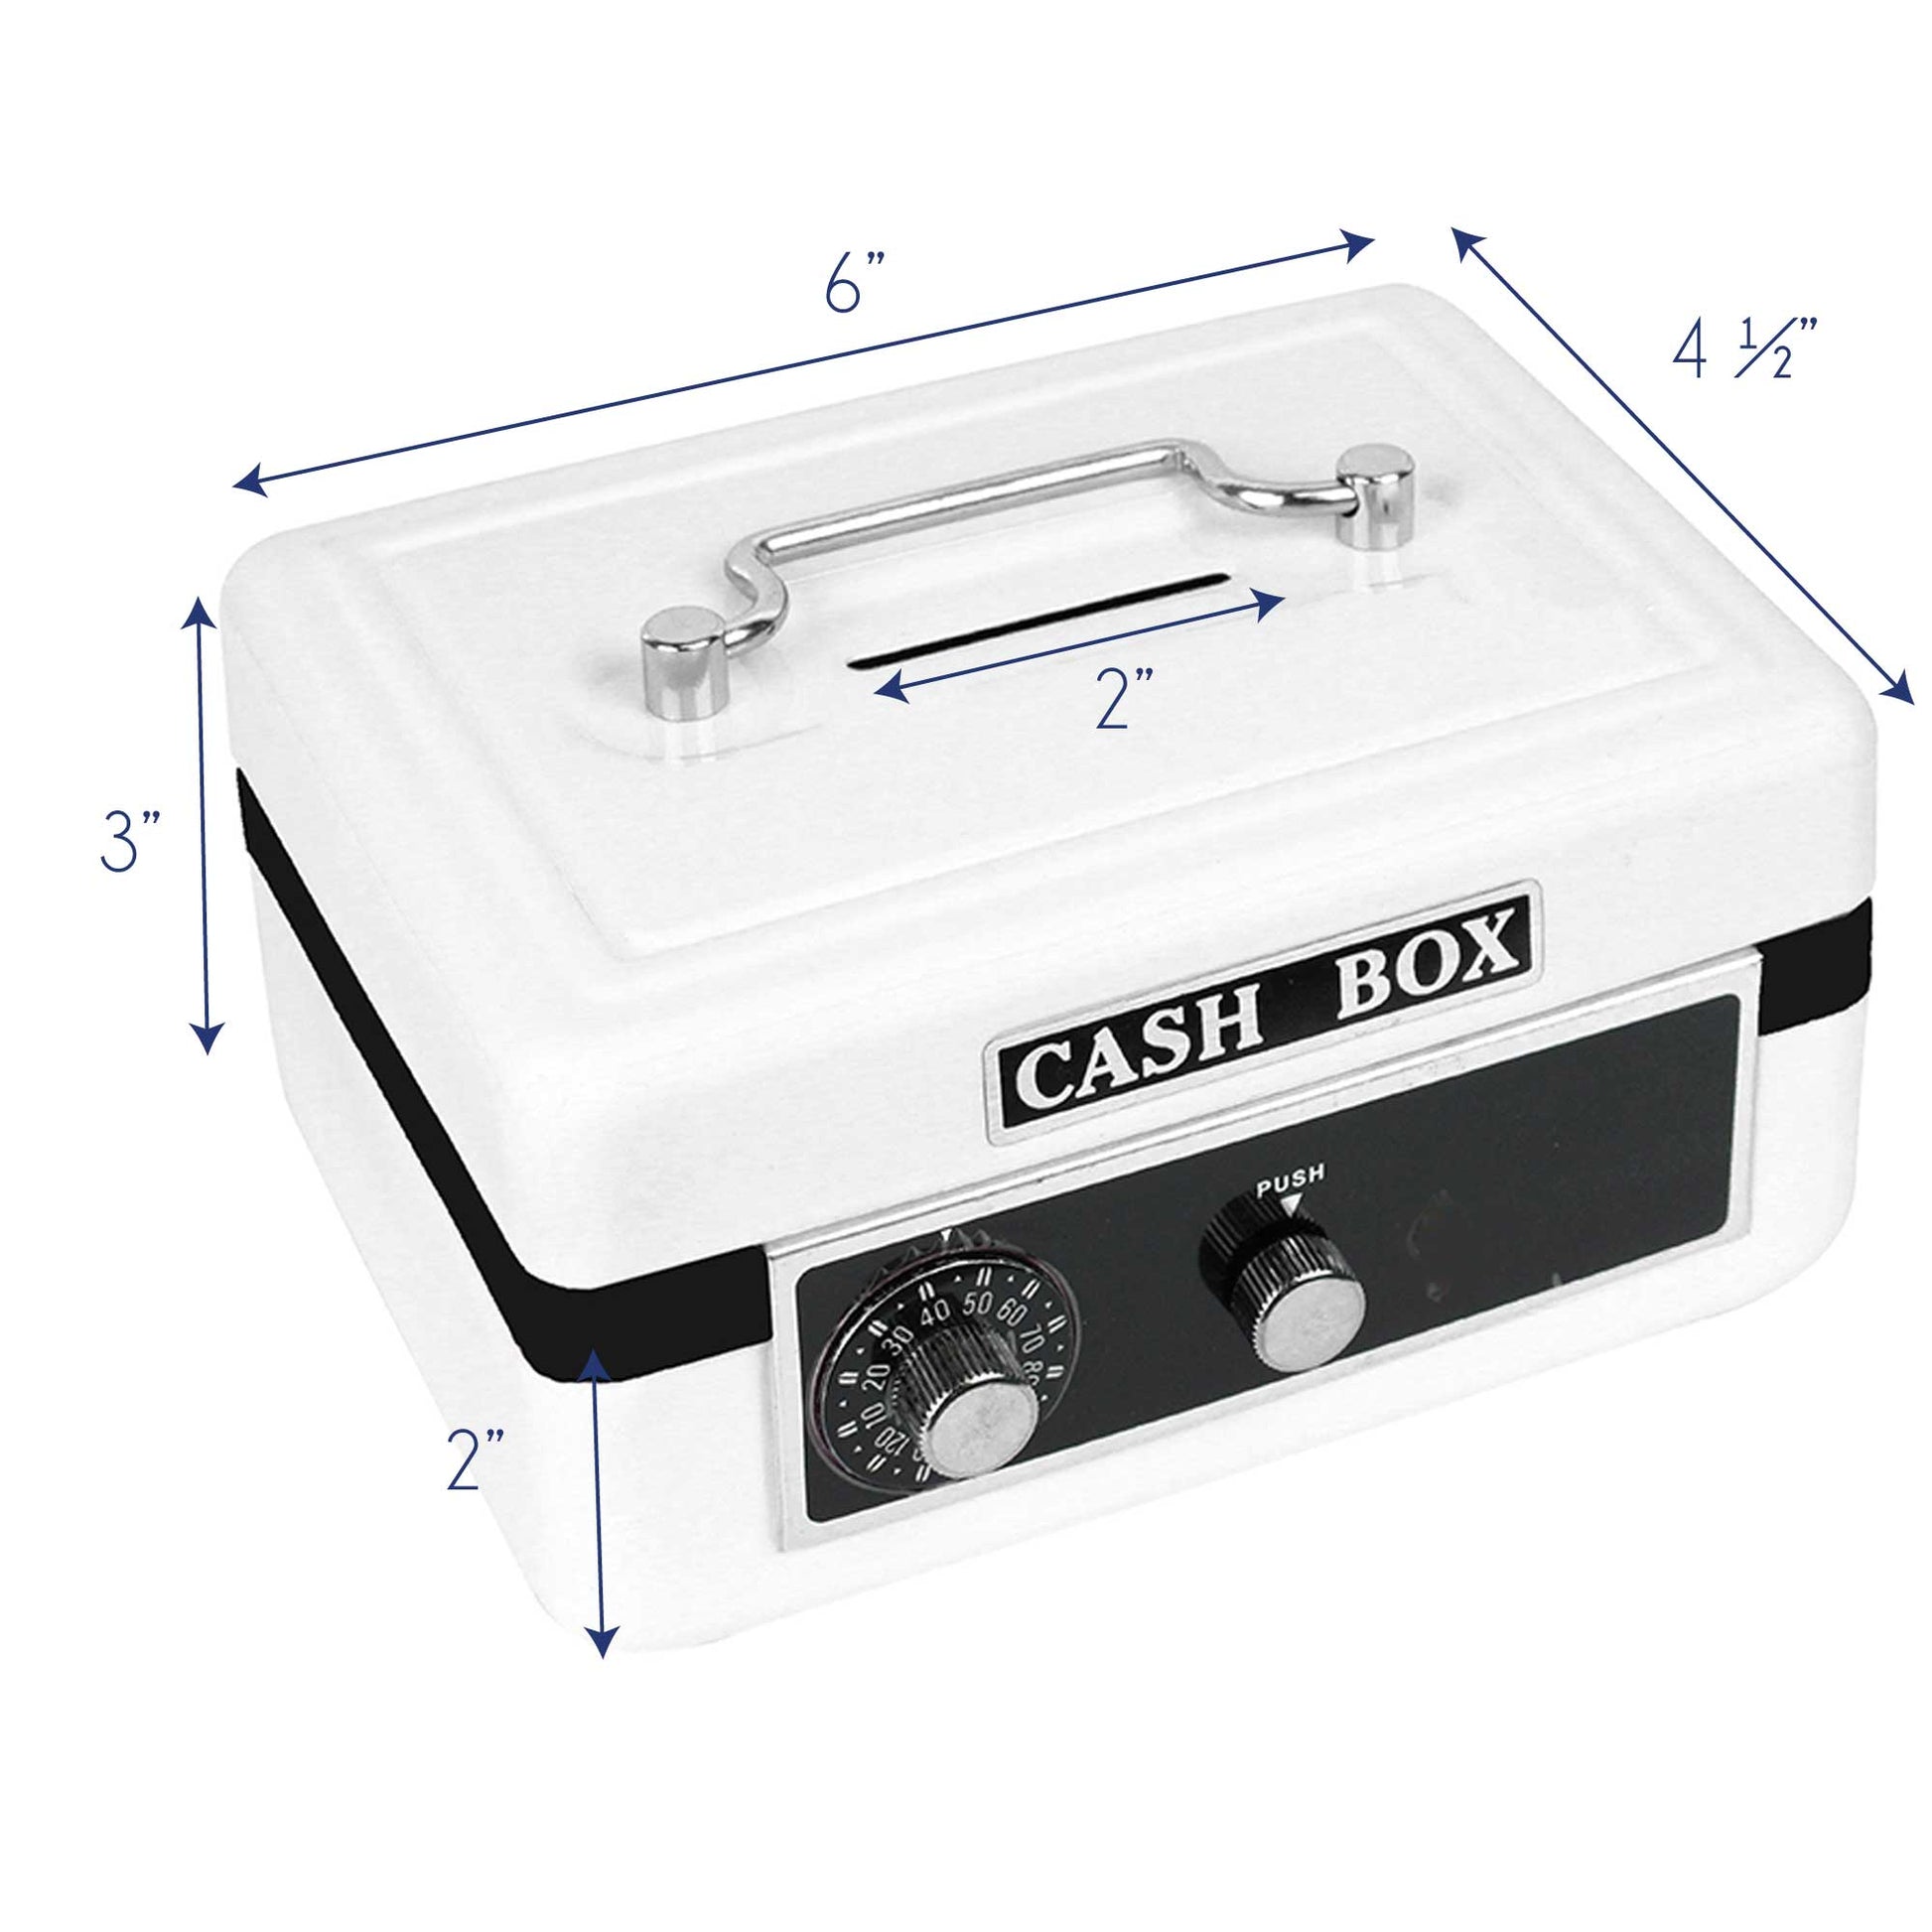 Personalized White Cash Box with Blue Puppy design